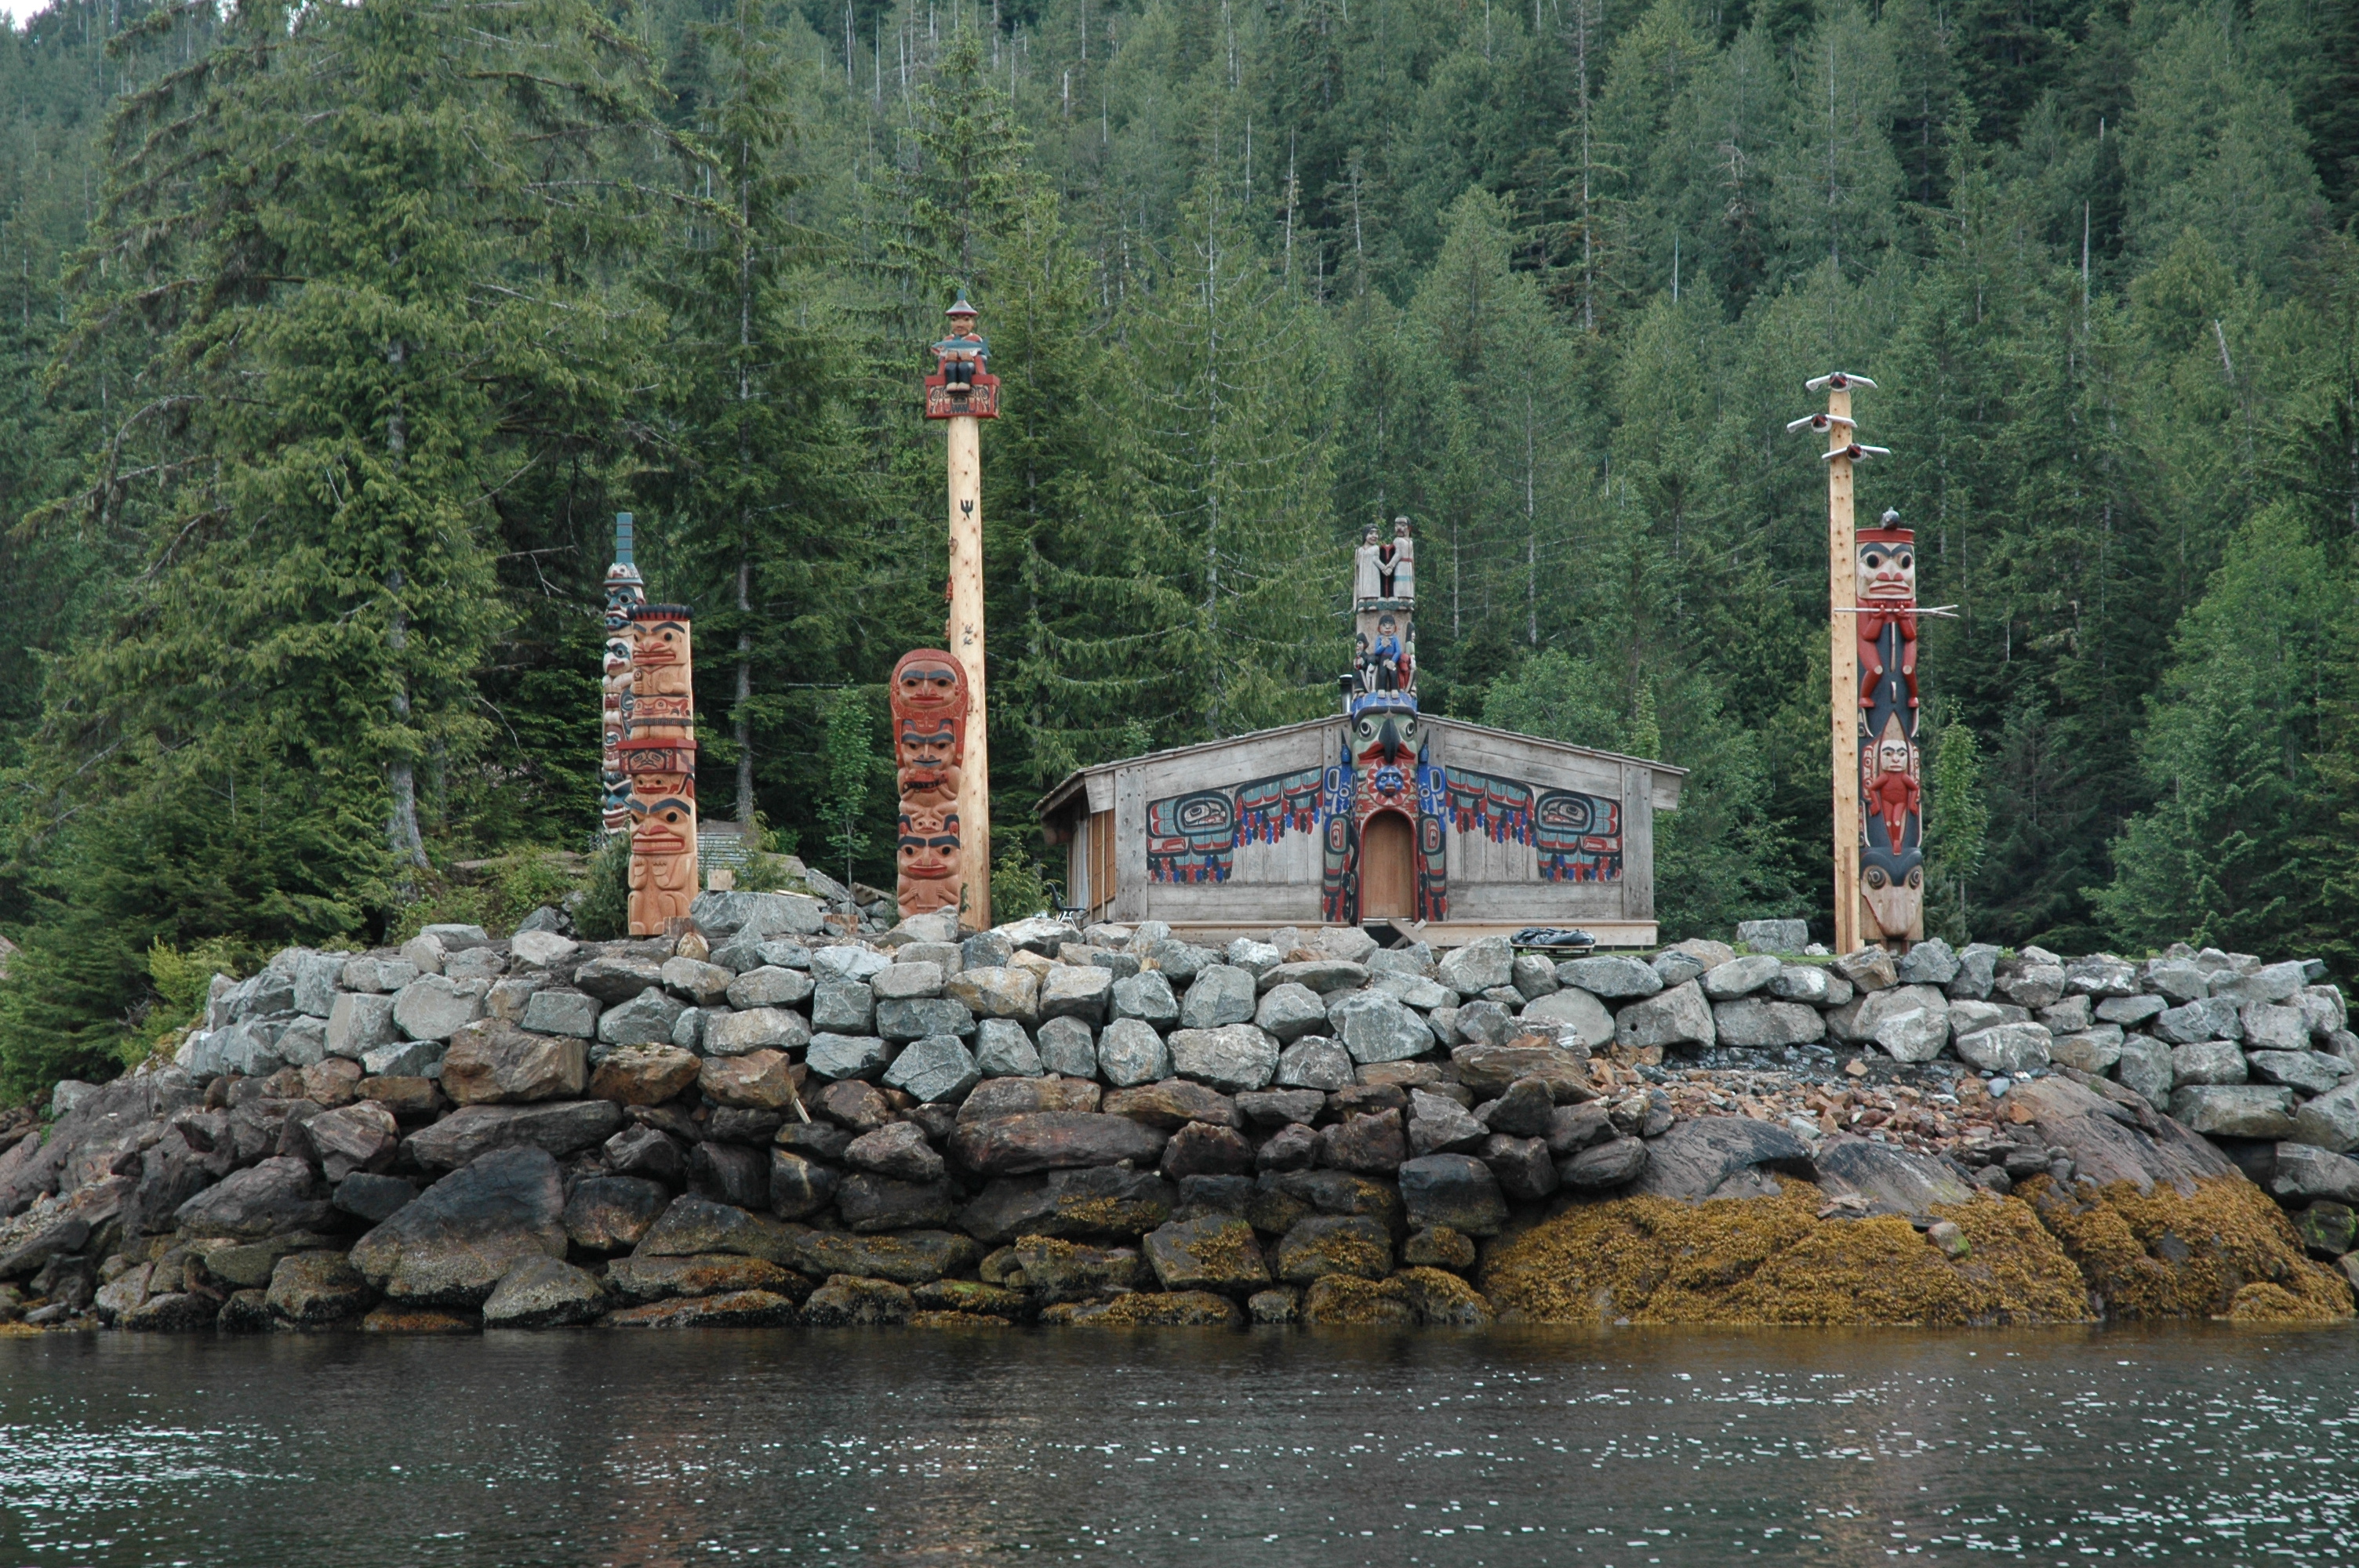 Completed Totem Pole Park